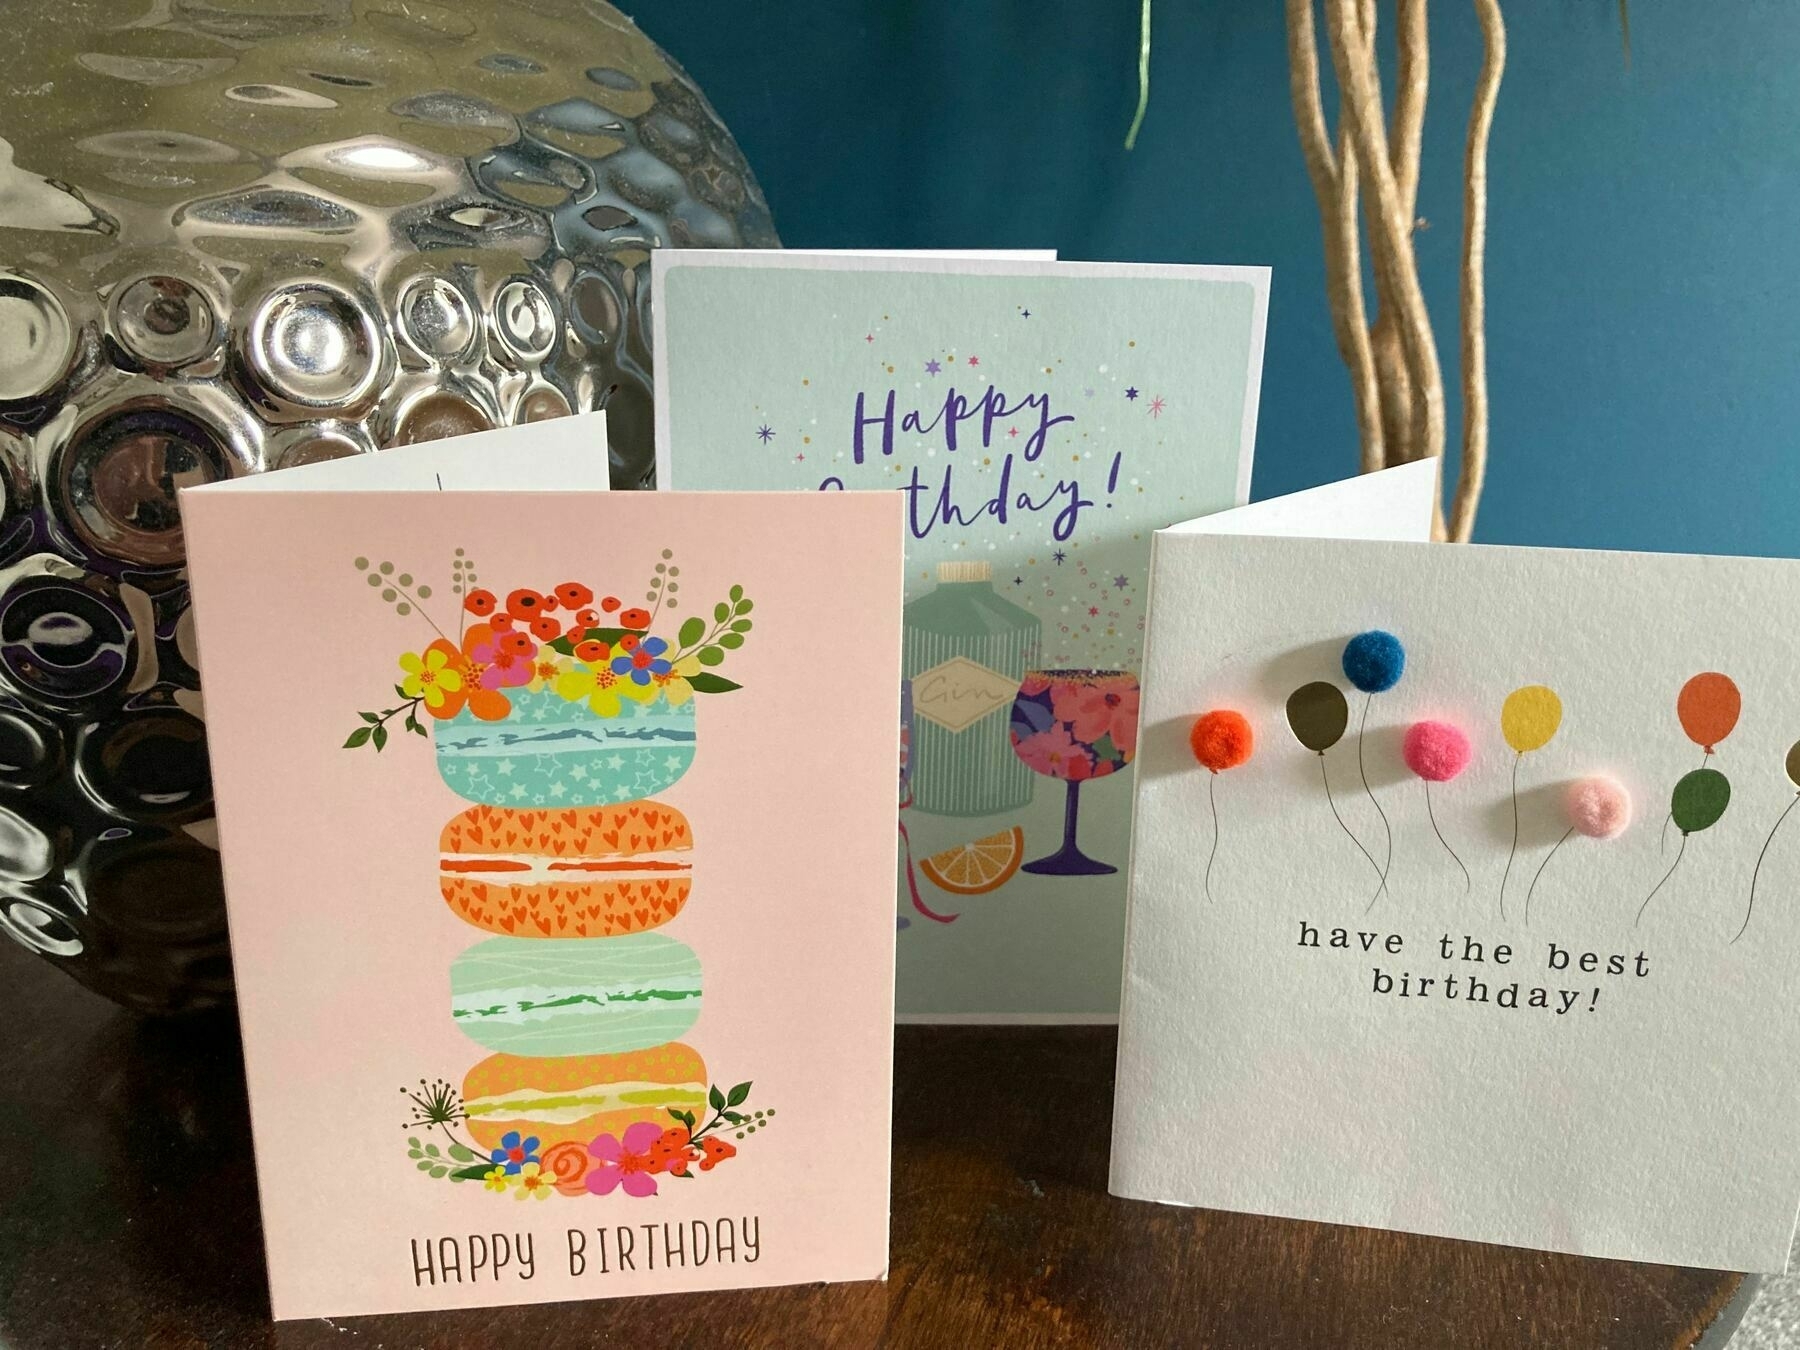 Three birthday cards standing on a shelf with a silvery ornament behind